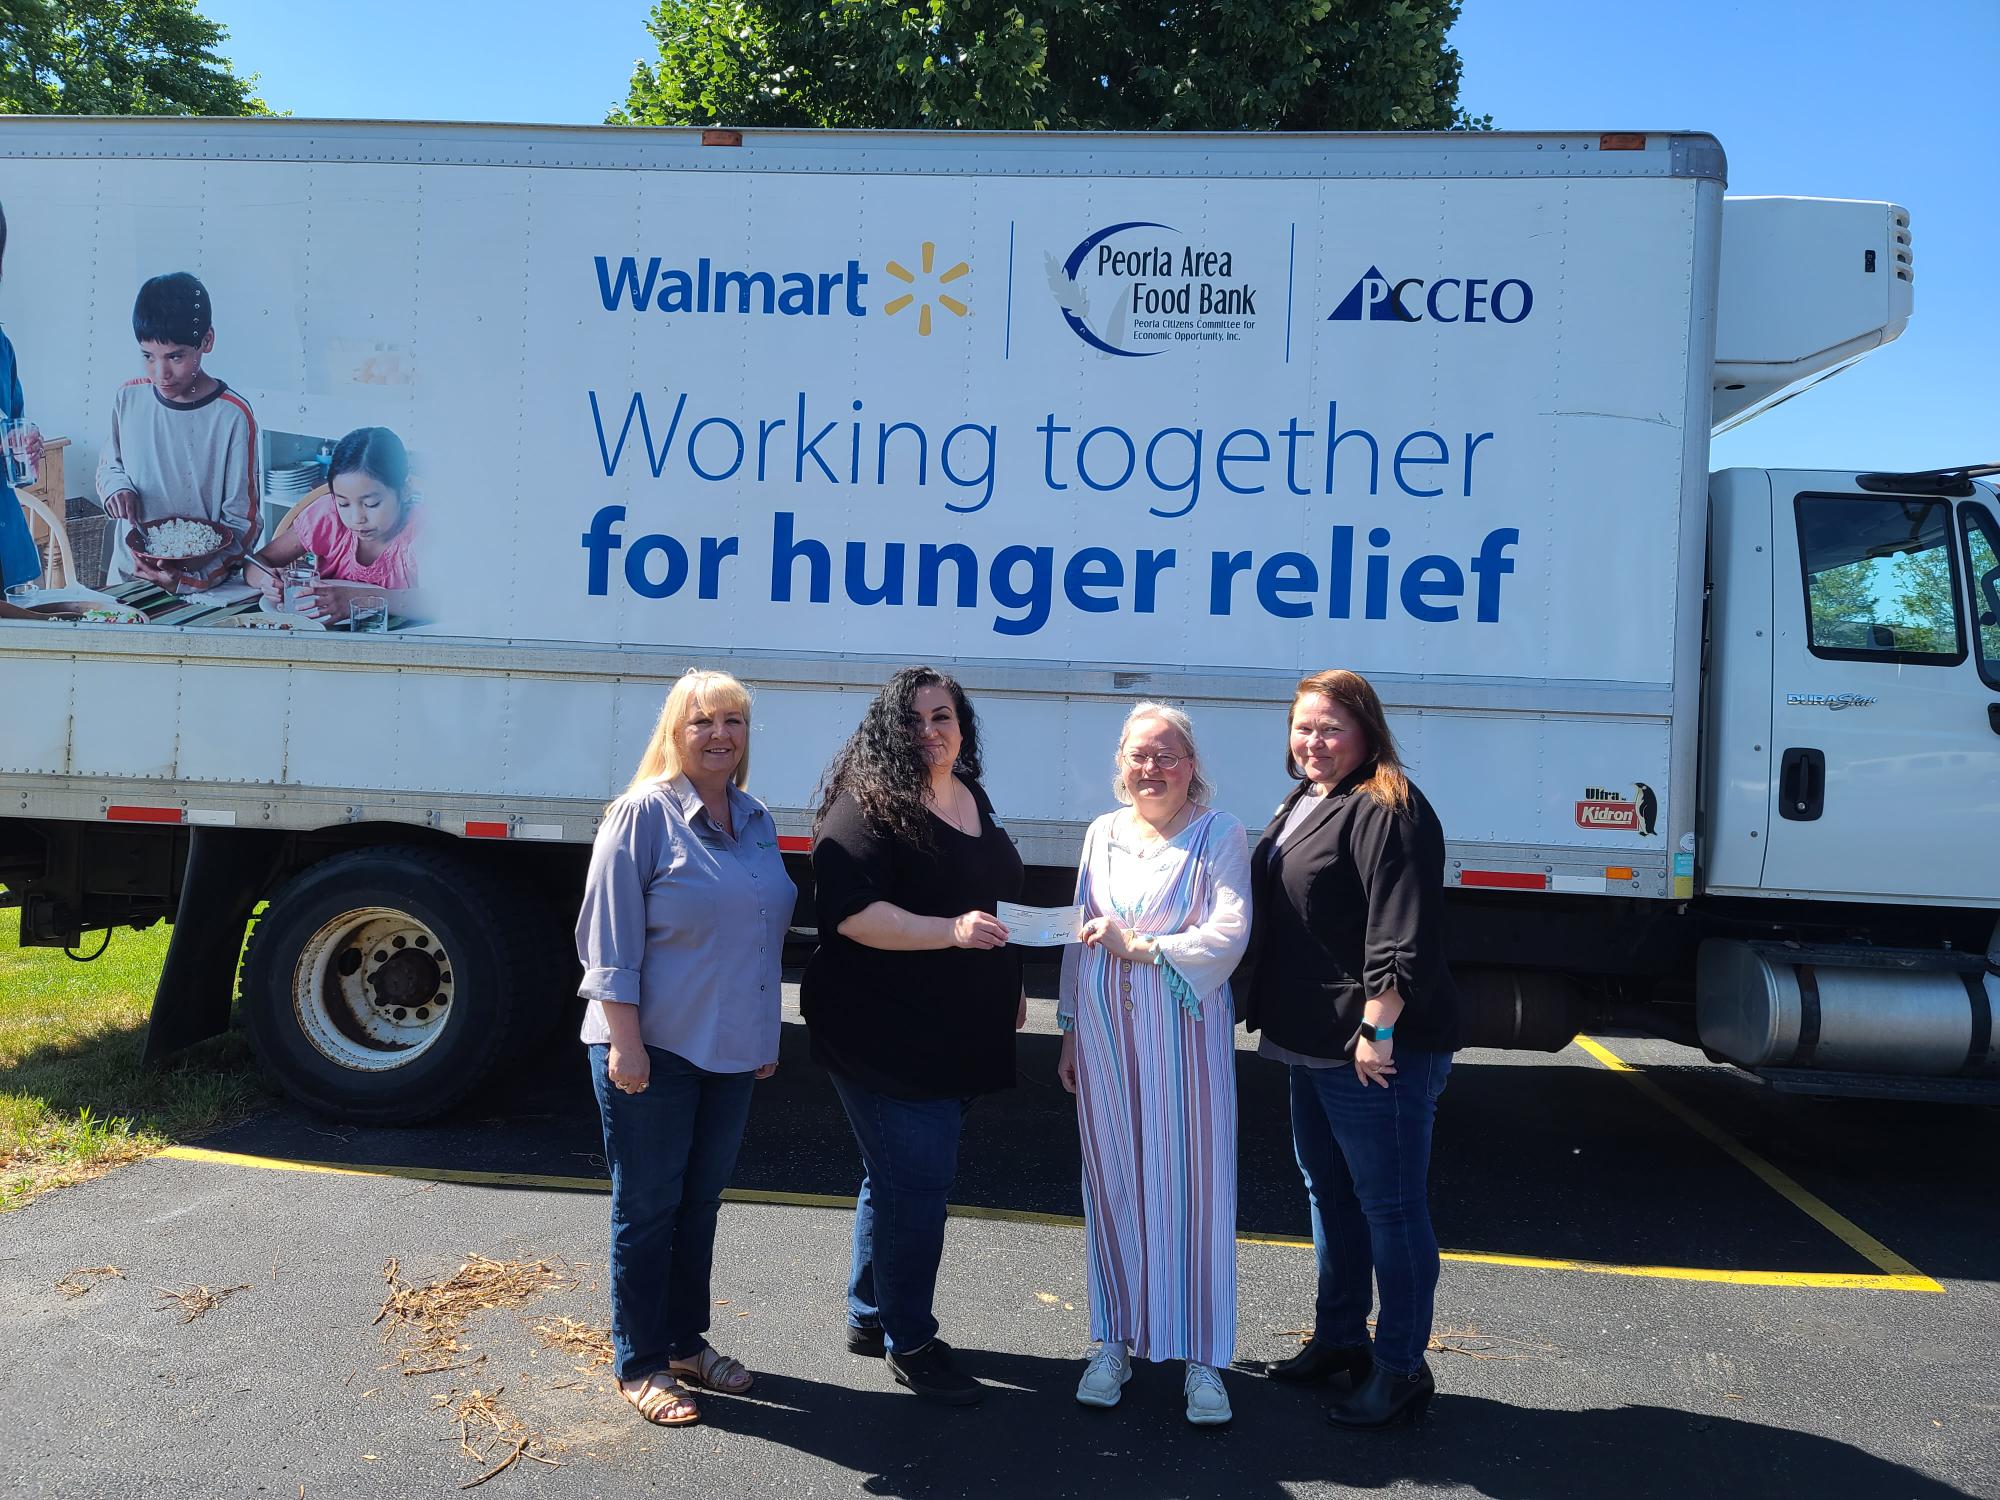 Peoria Area Food bank received a $2,800.00 donation from WCF.